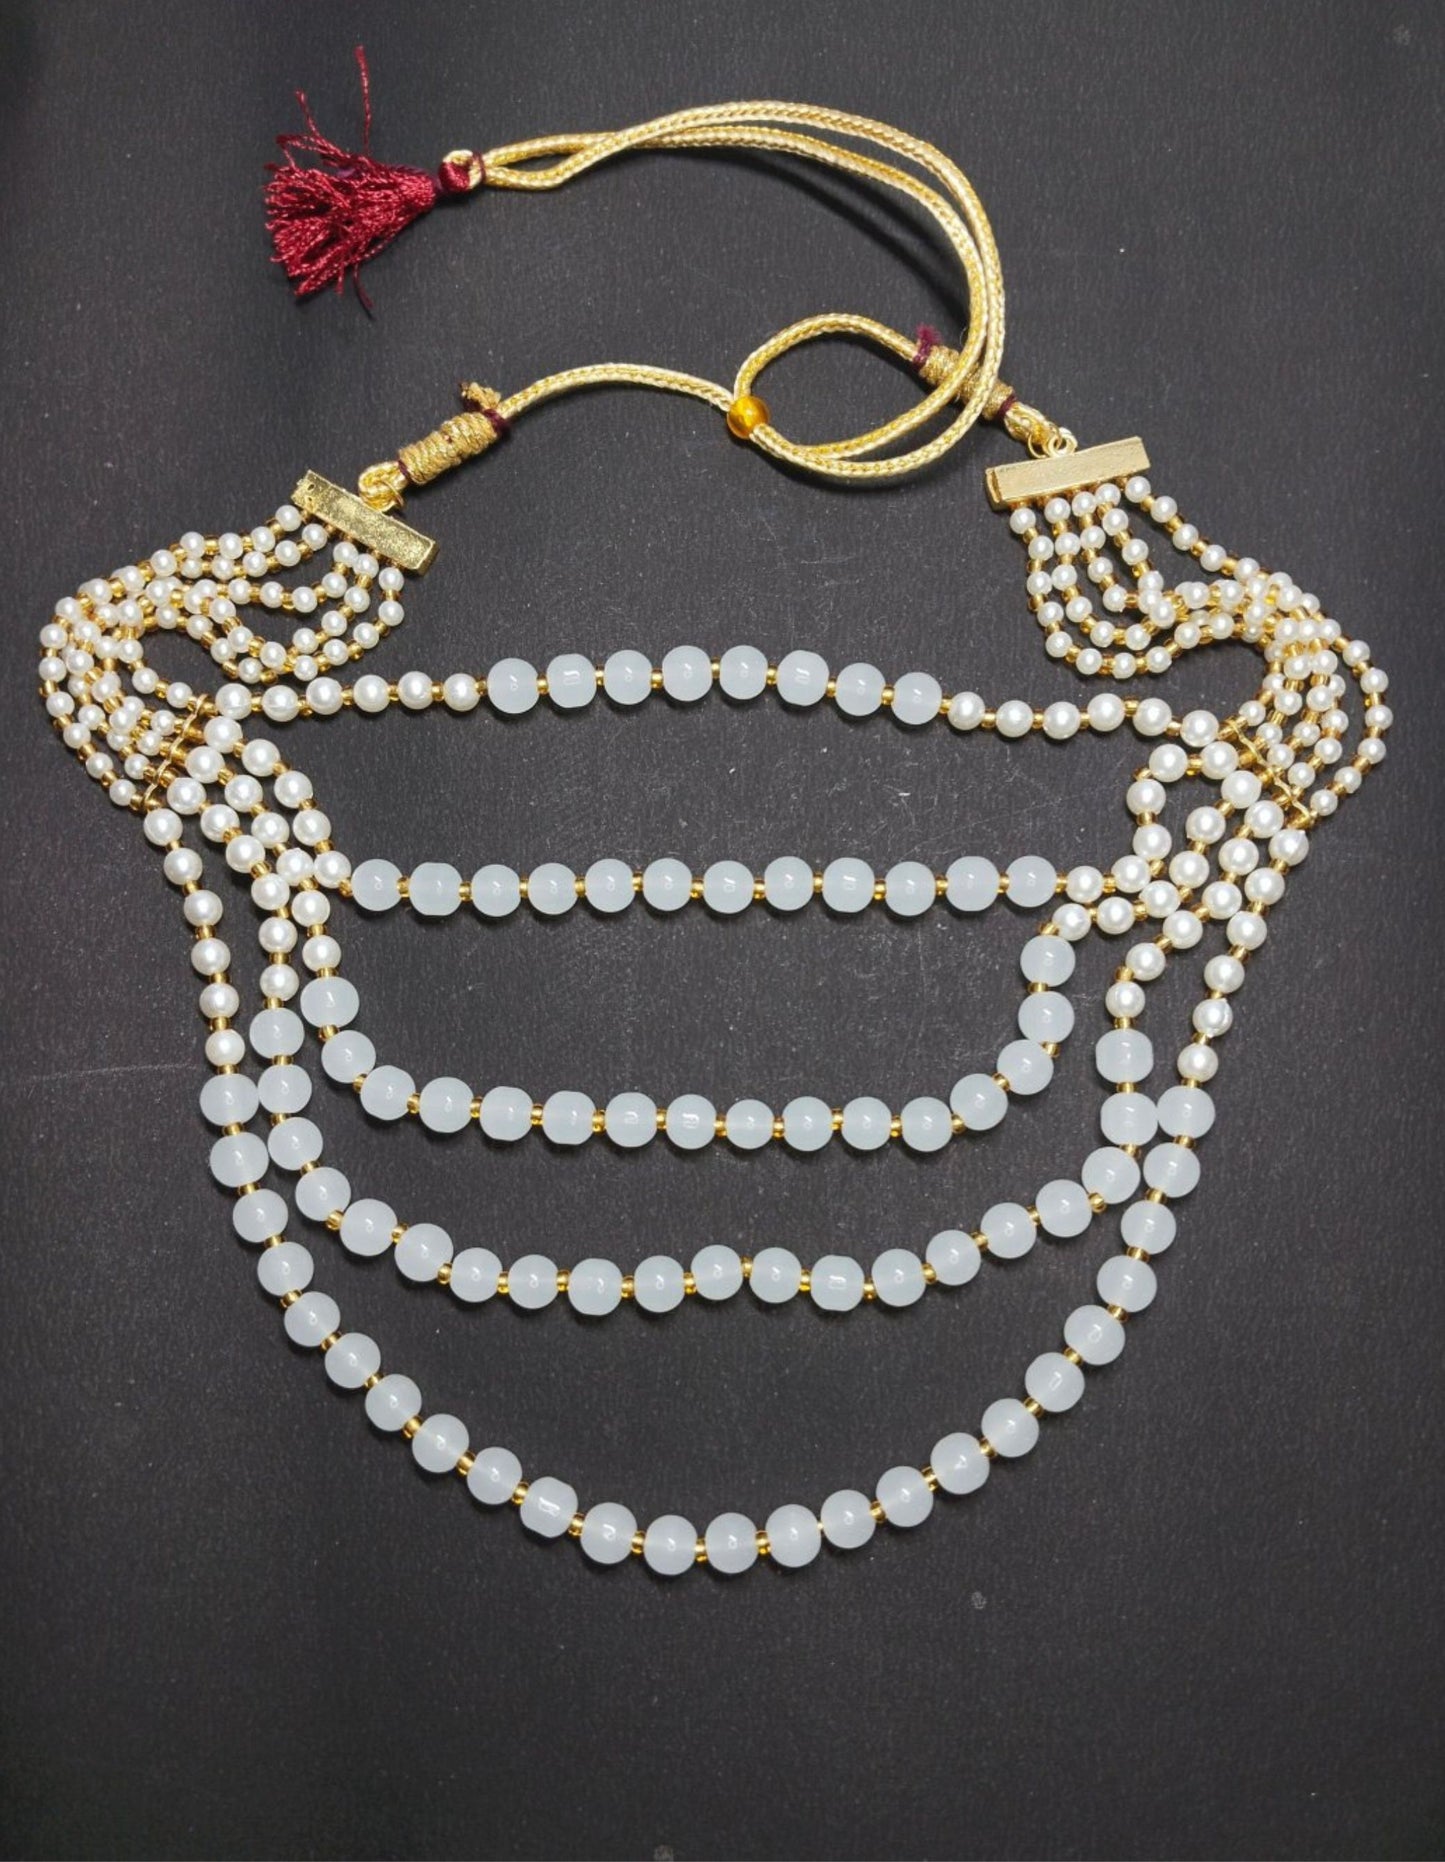 5 LAYER DOUBLE COATED NATURAL PEARL MALA